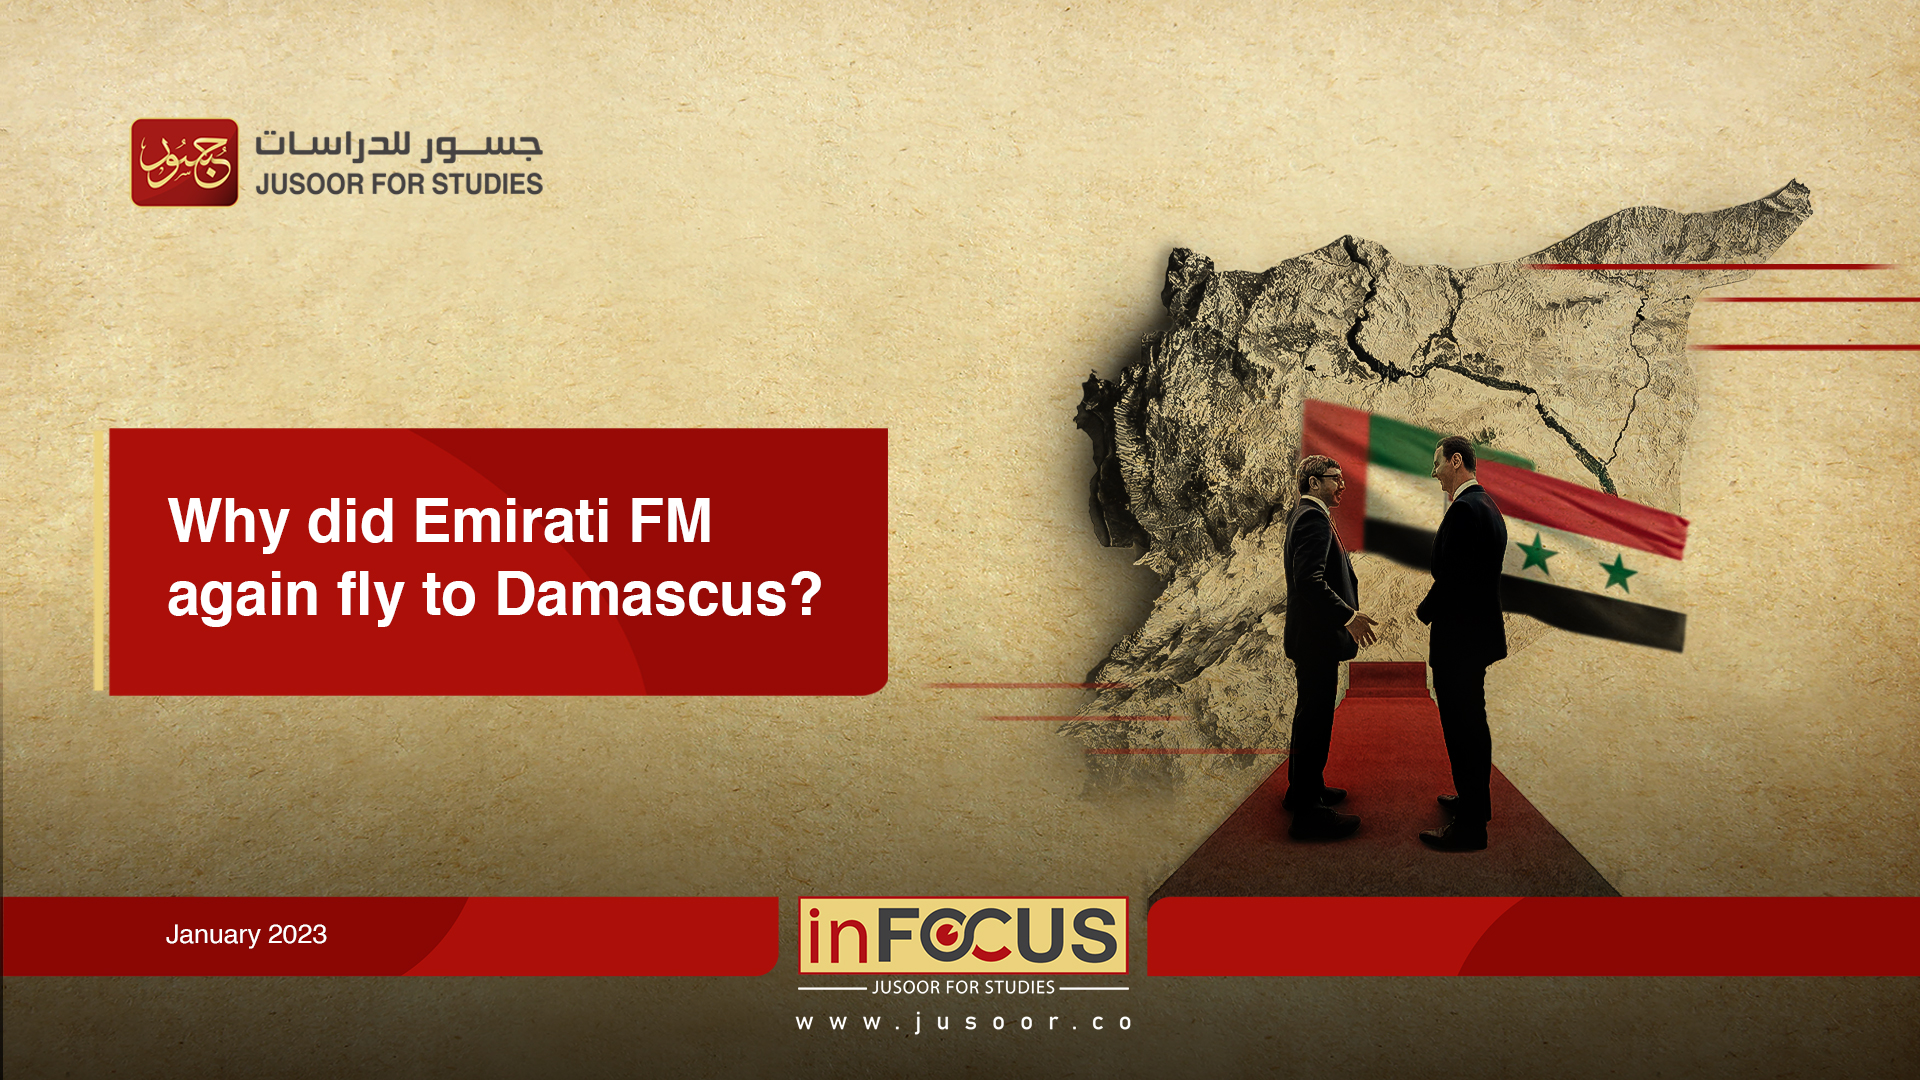 Why did Emirati FM again fly to Damascus?